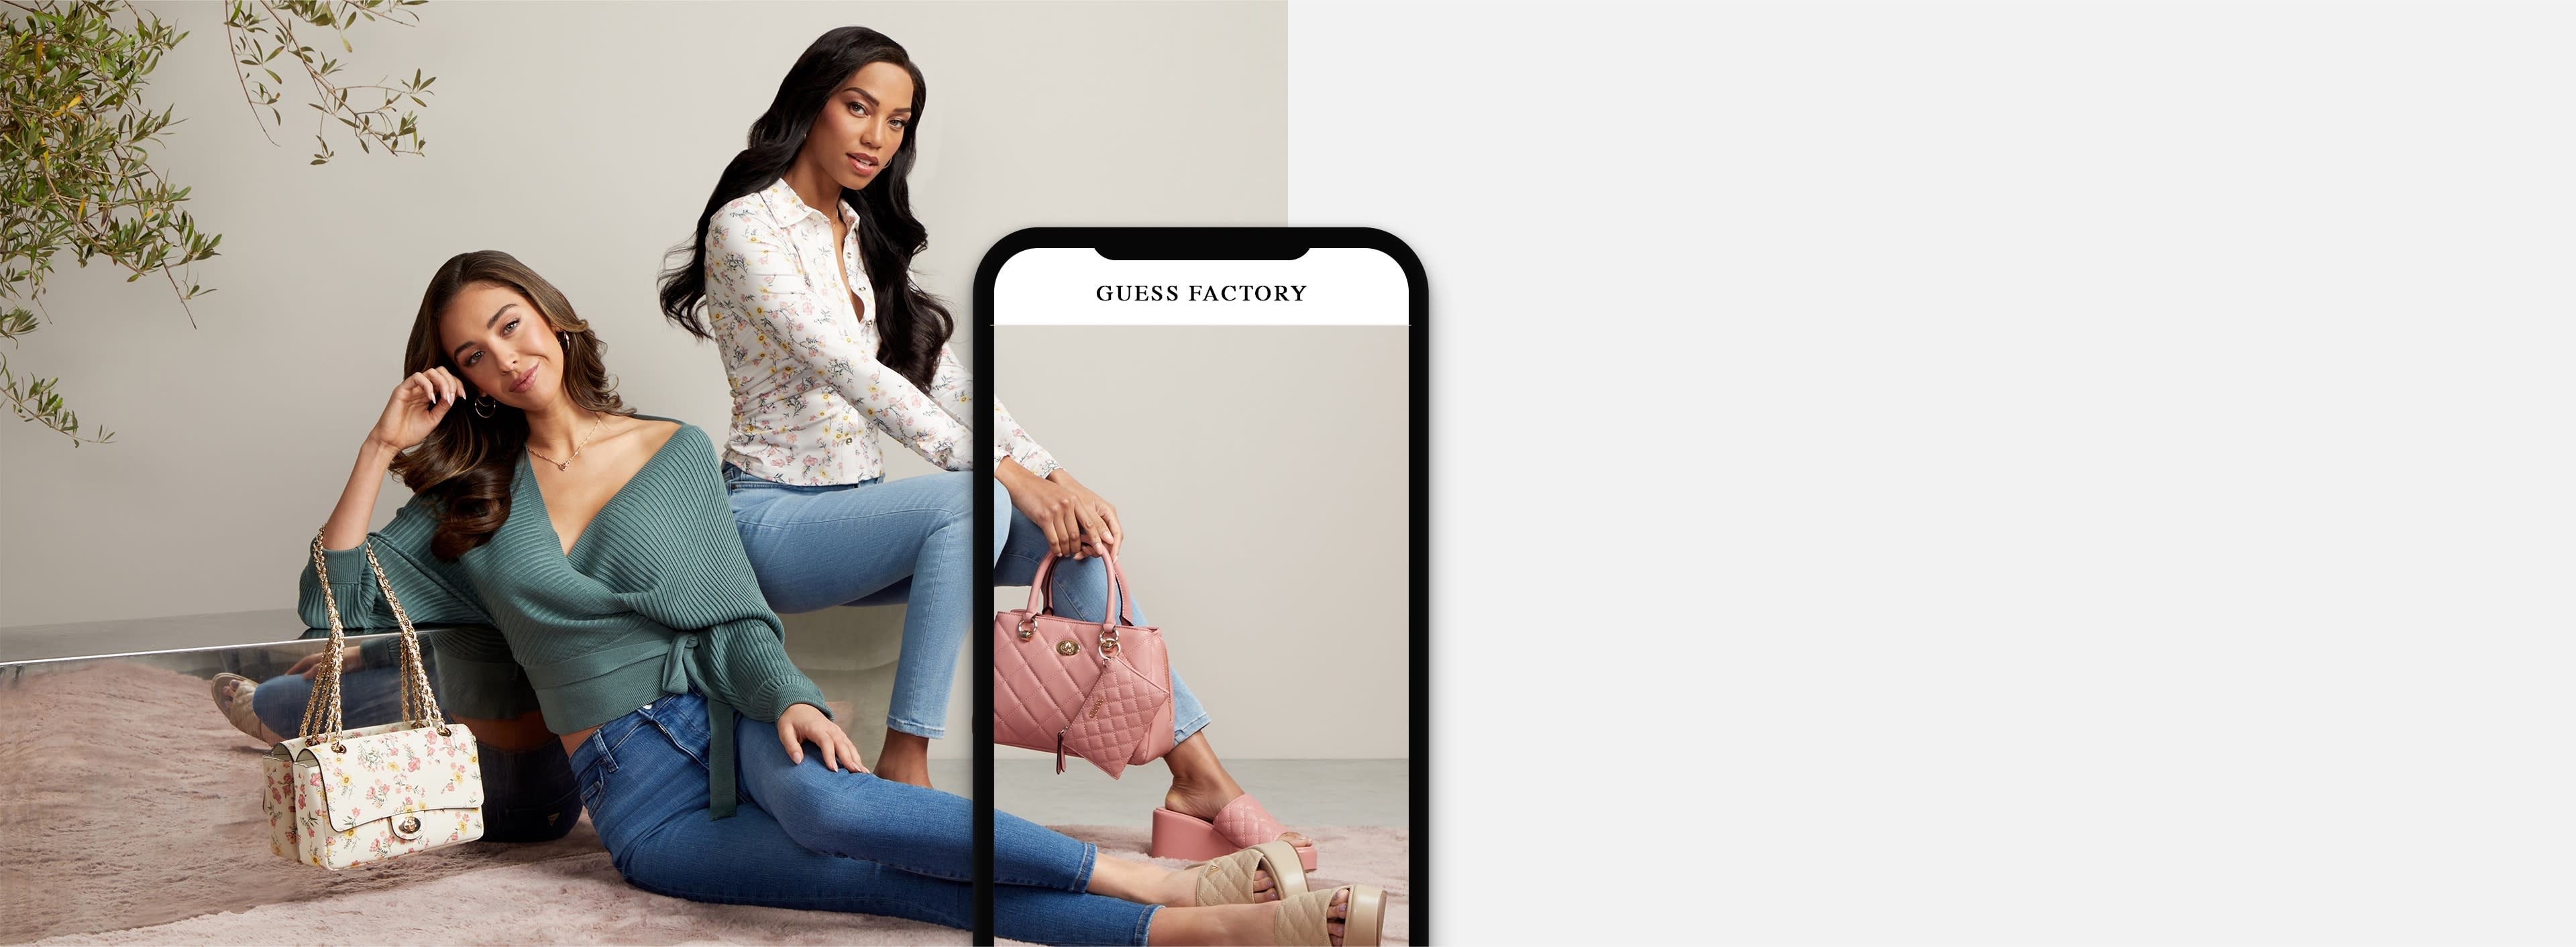 THE GUESS FACTORY APP: A VIP shopping experience